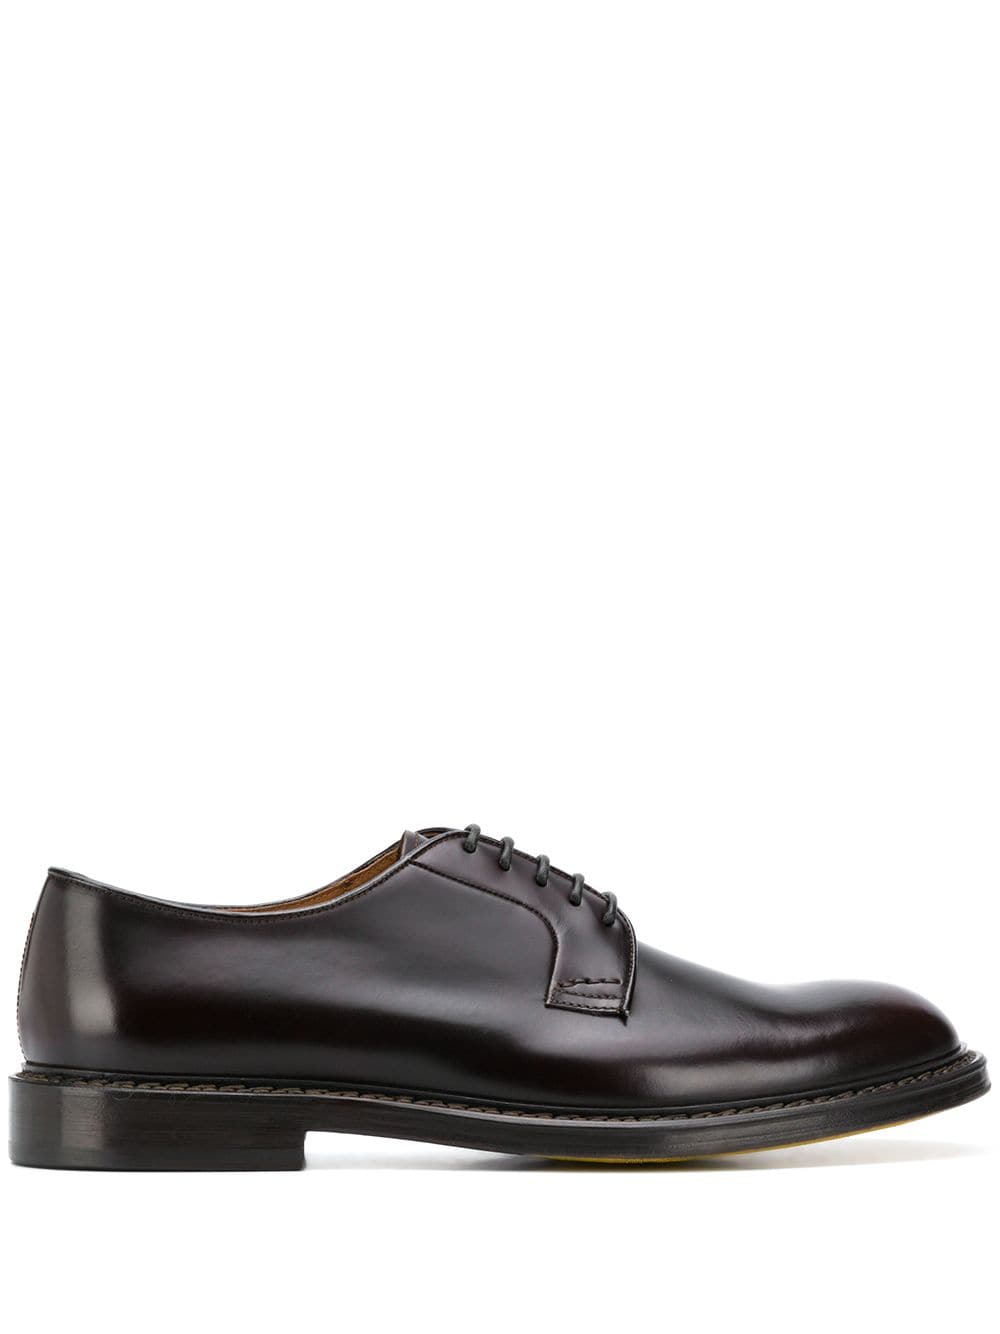 Doucal's lace-up Derby shoes - Brown von Doucal's